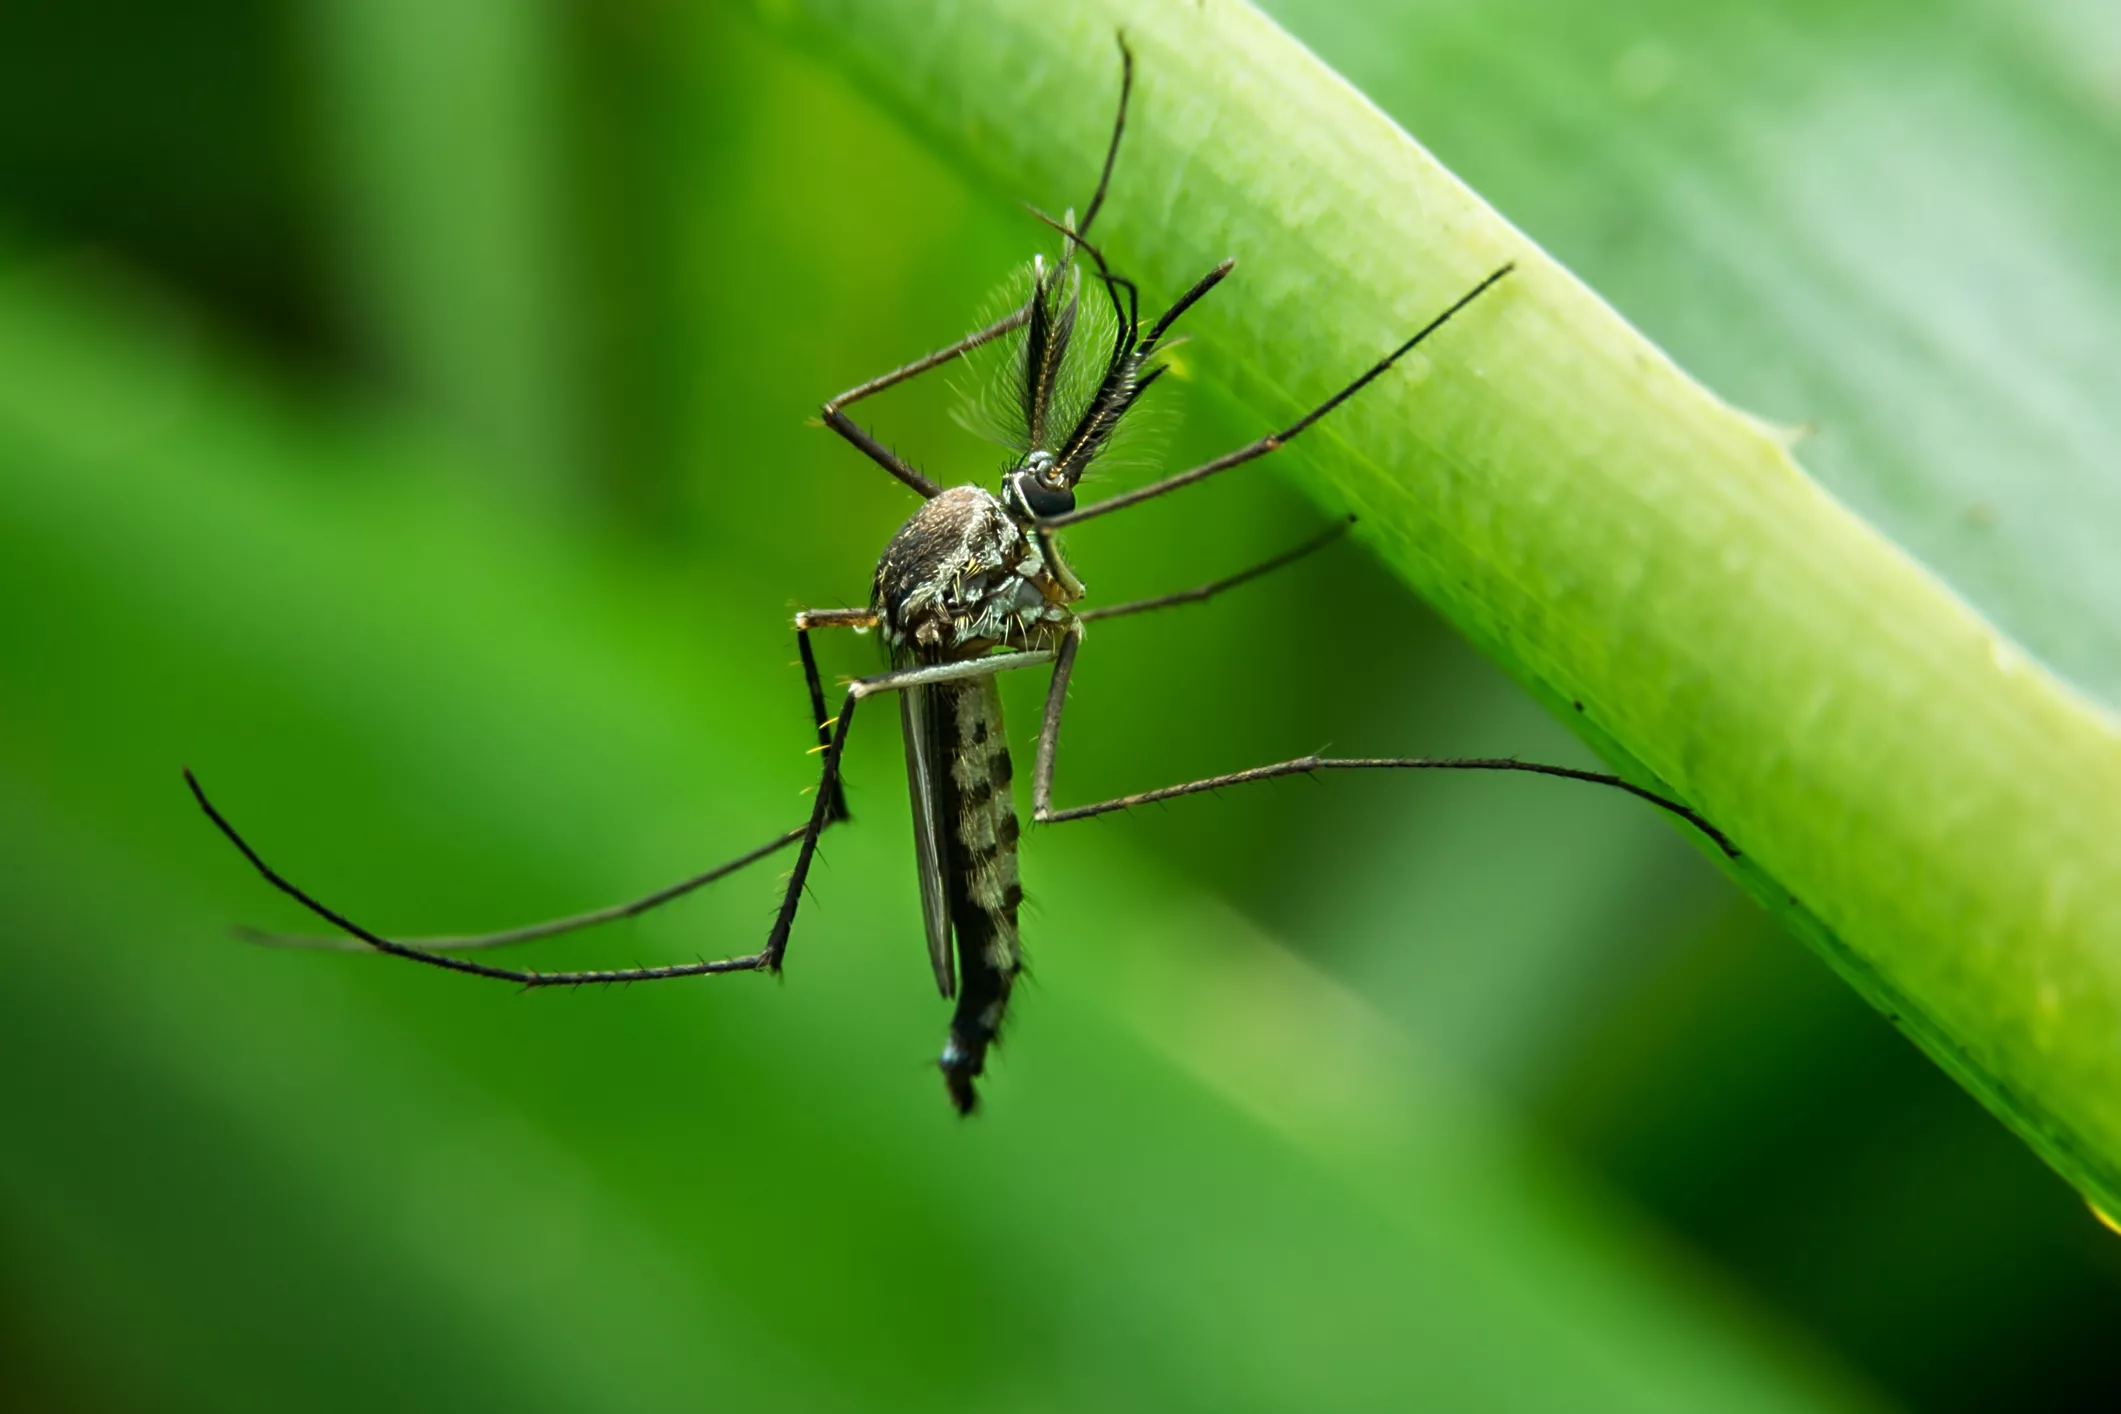 A close up of a mosquito on a green leaf.